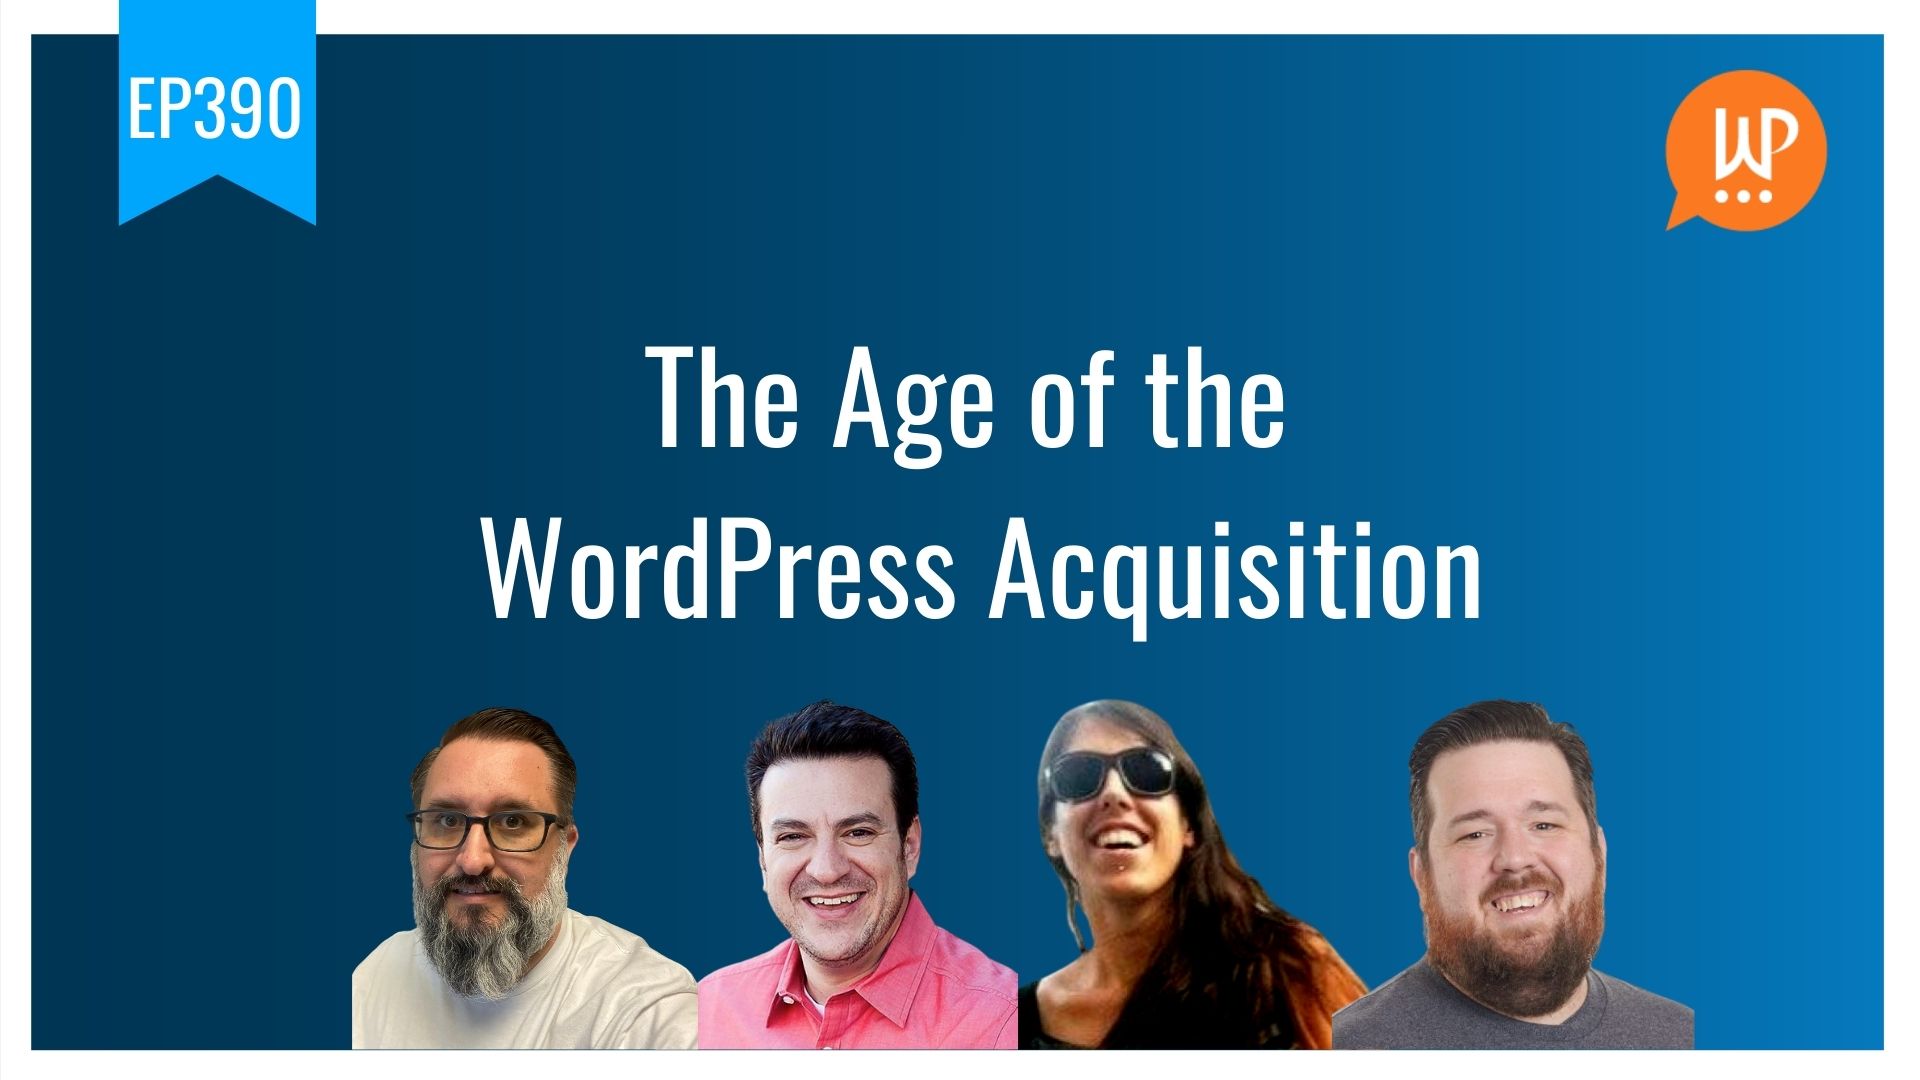 EP390 – The Age of the WordPress Acquisition